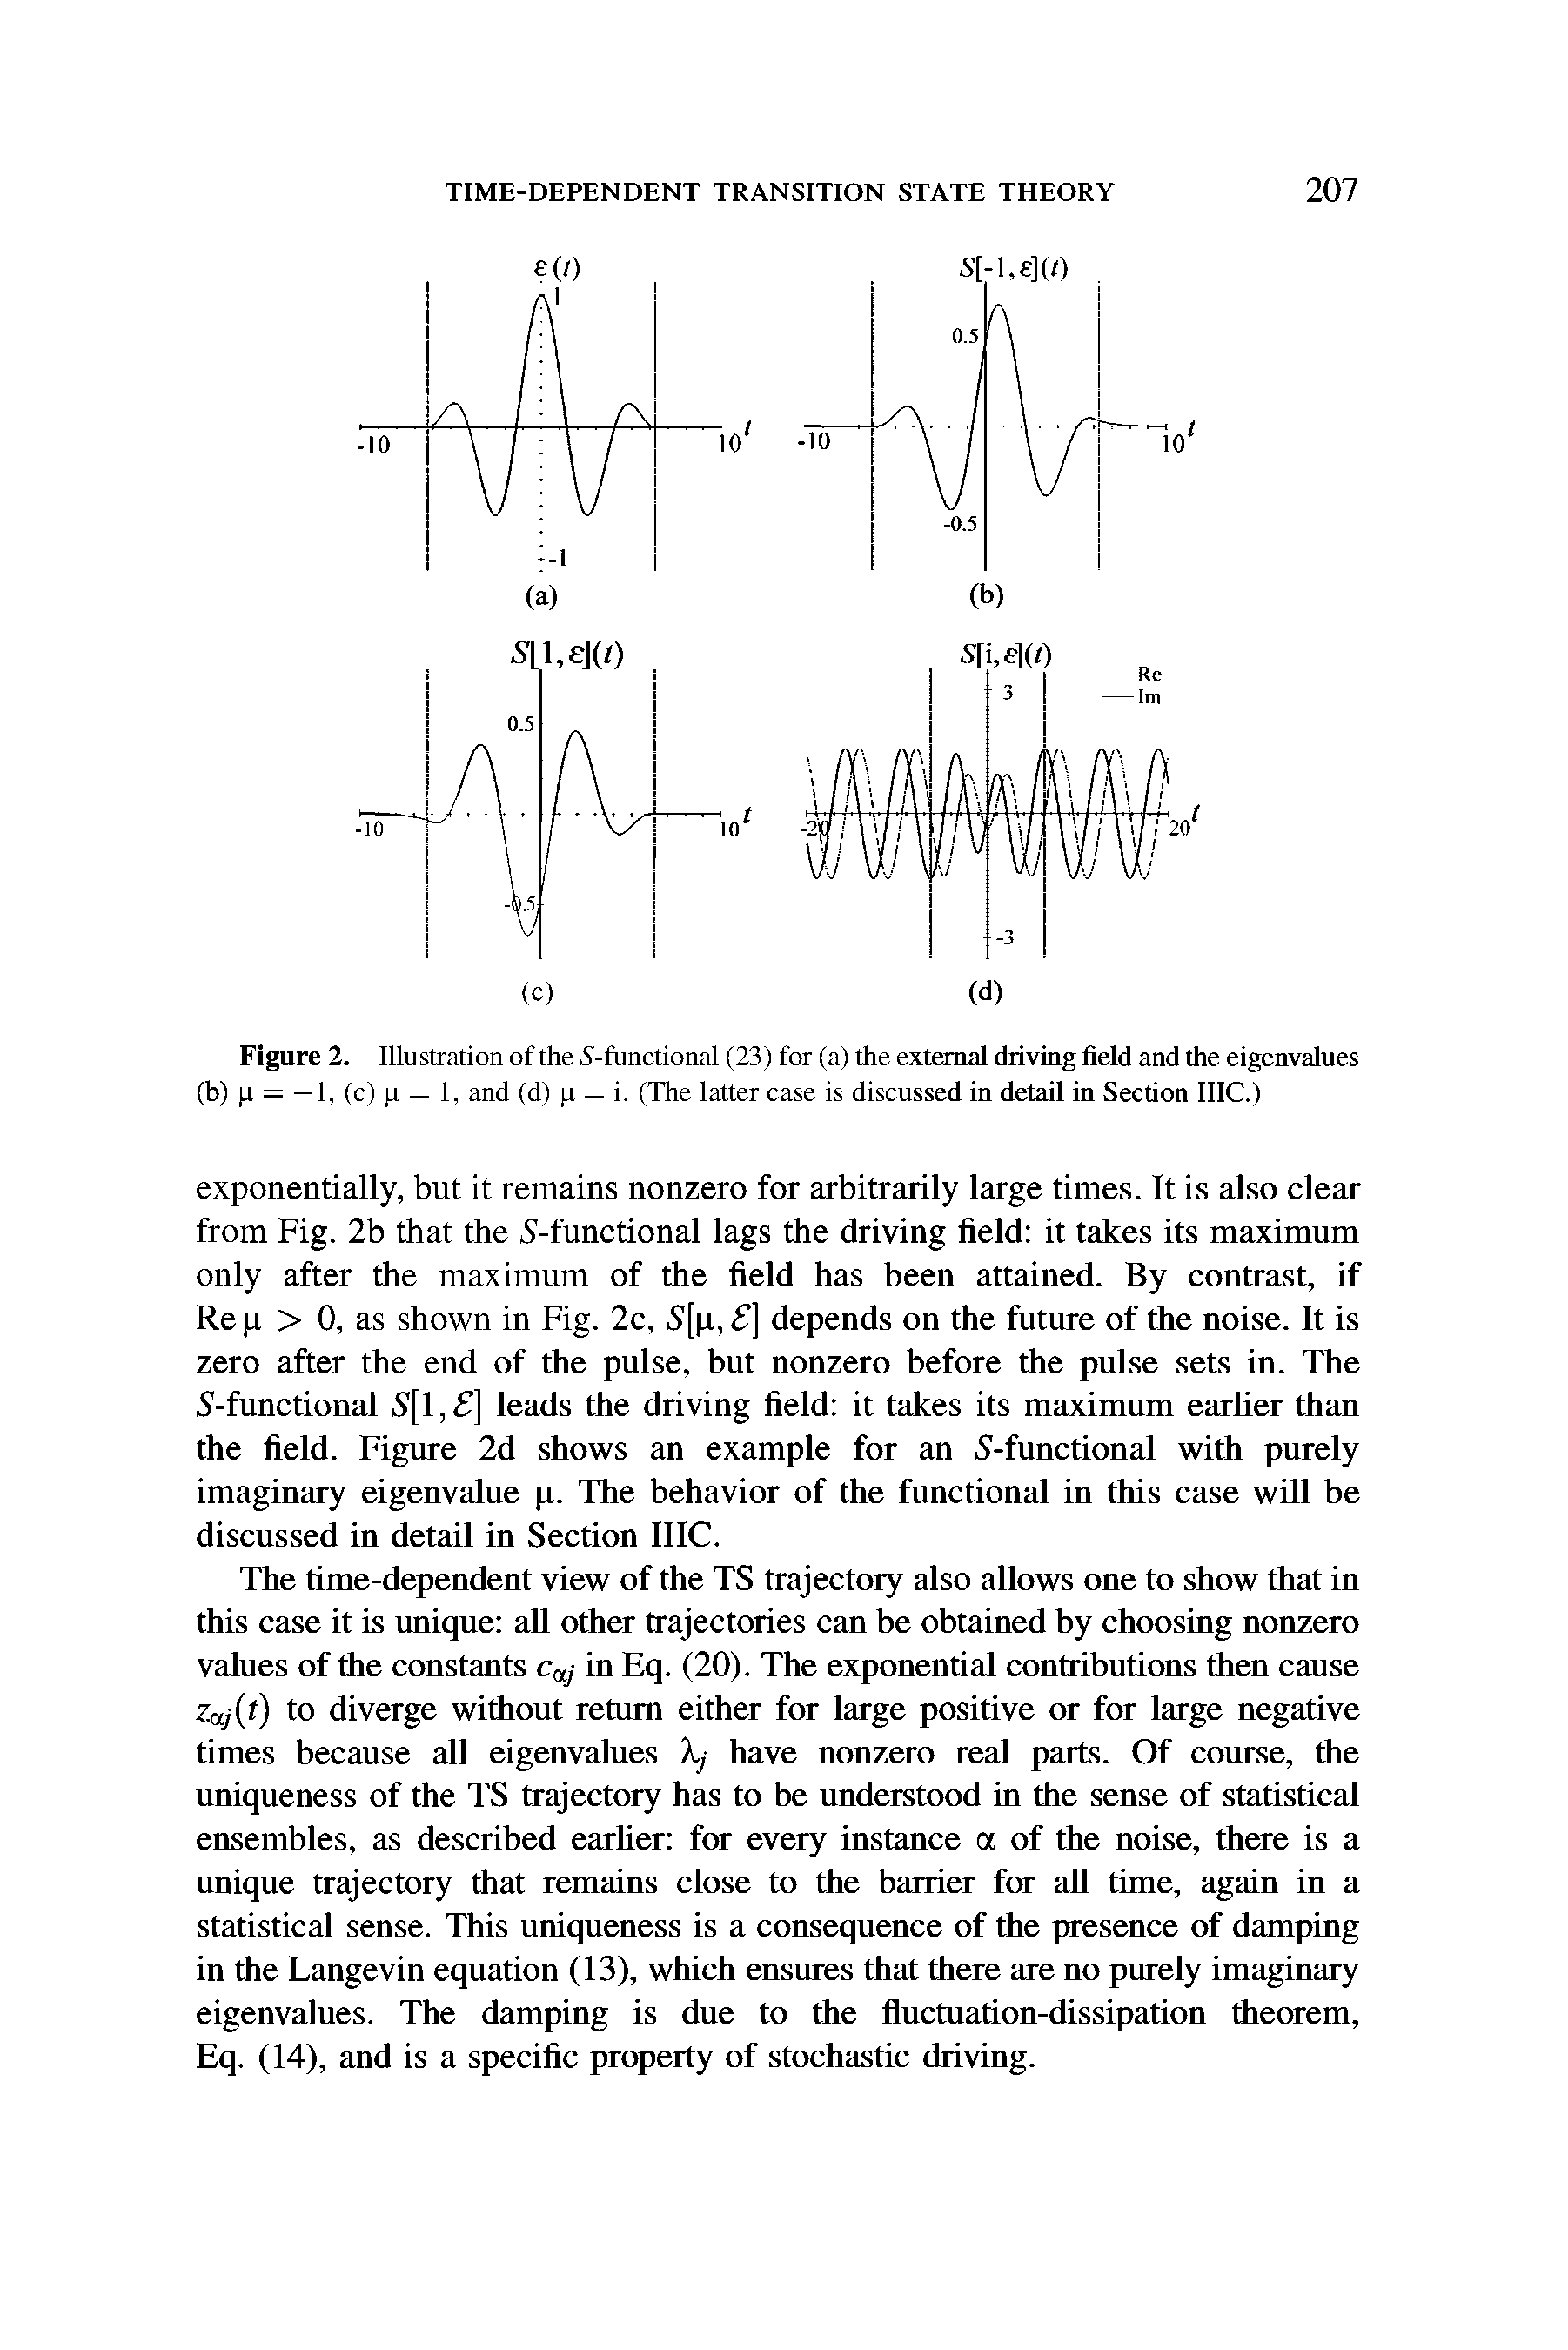 Figure 2. Illustration of the S-functional (23) for (a) the external driving field and the eigenvalues (b) jj, = —1, (c) (i = l, and (d) (j, = i. (The latter case is discussed in detail in Section IIIC.)...